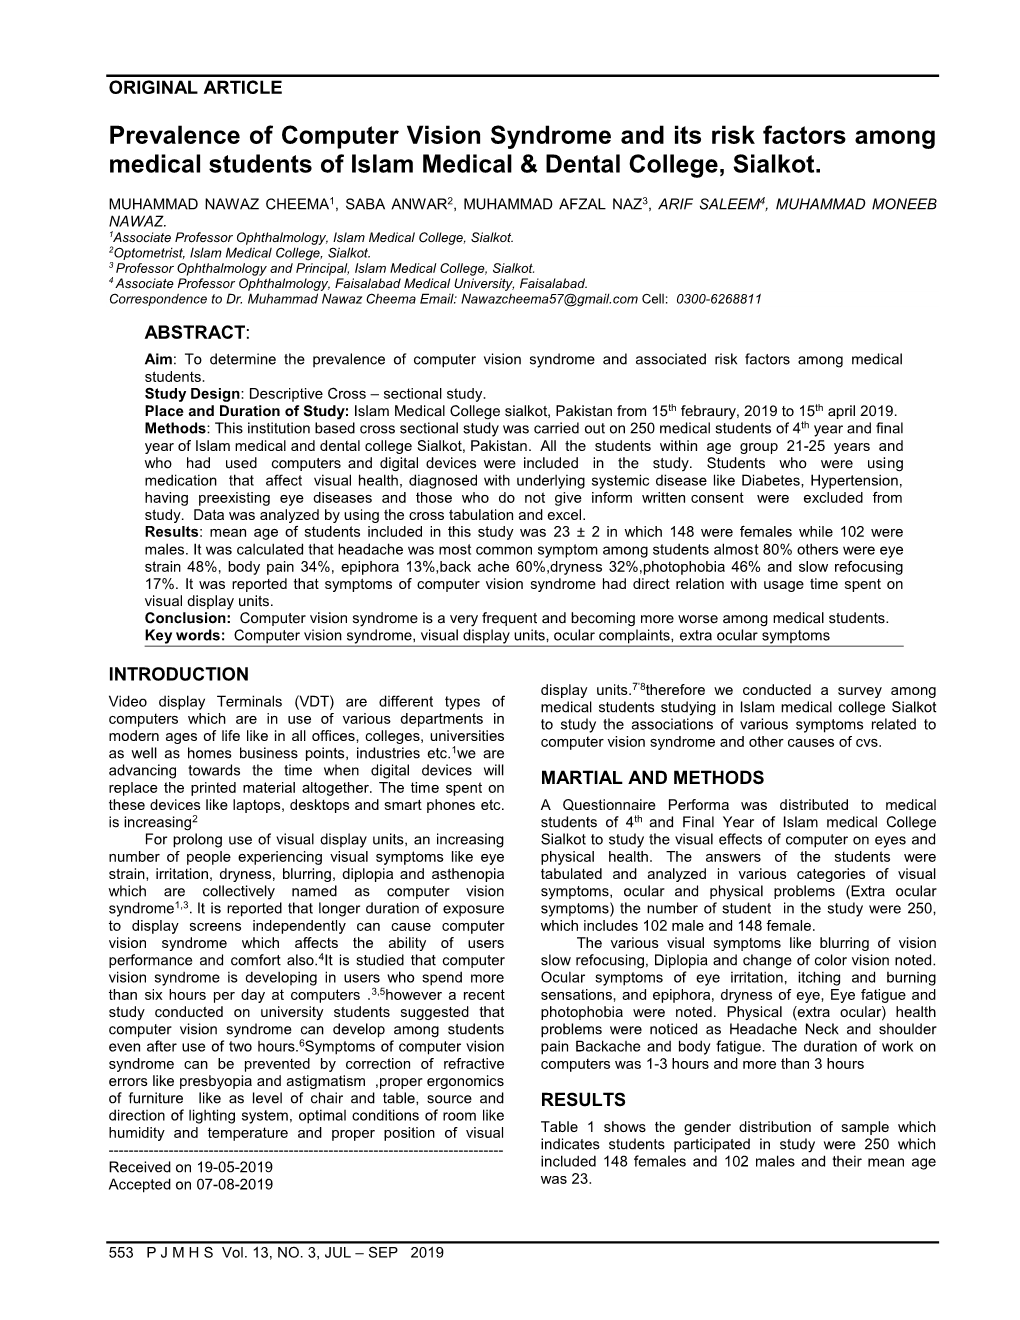 Prevalence of Computer Vision Syndrome and Its Risk Factors Among Medical Students of Islam Medical & Dental College, Sialkot